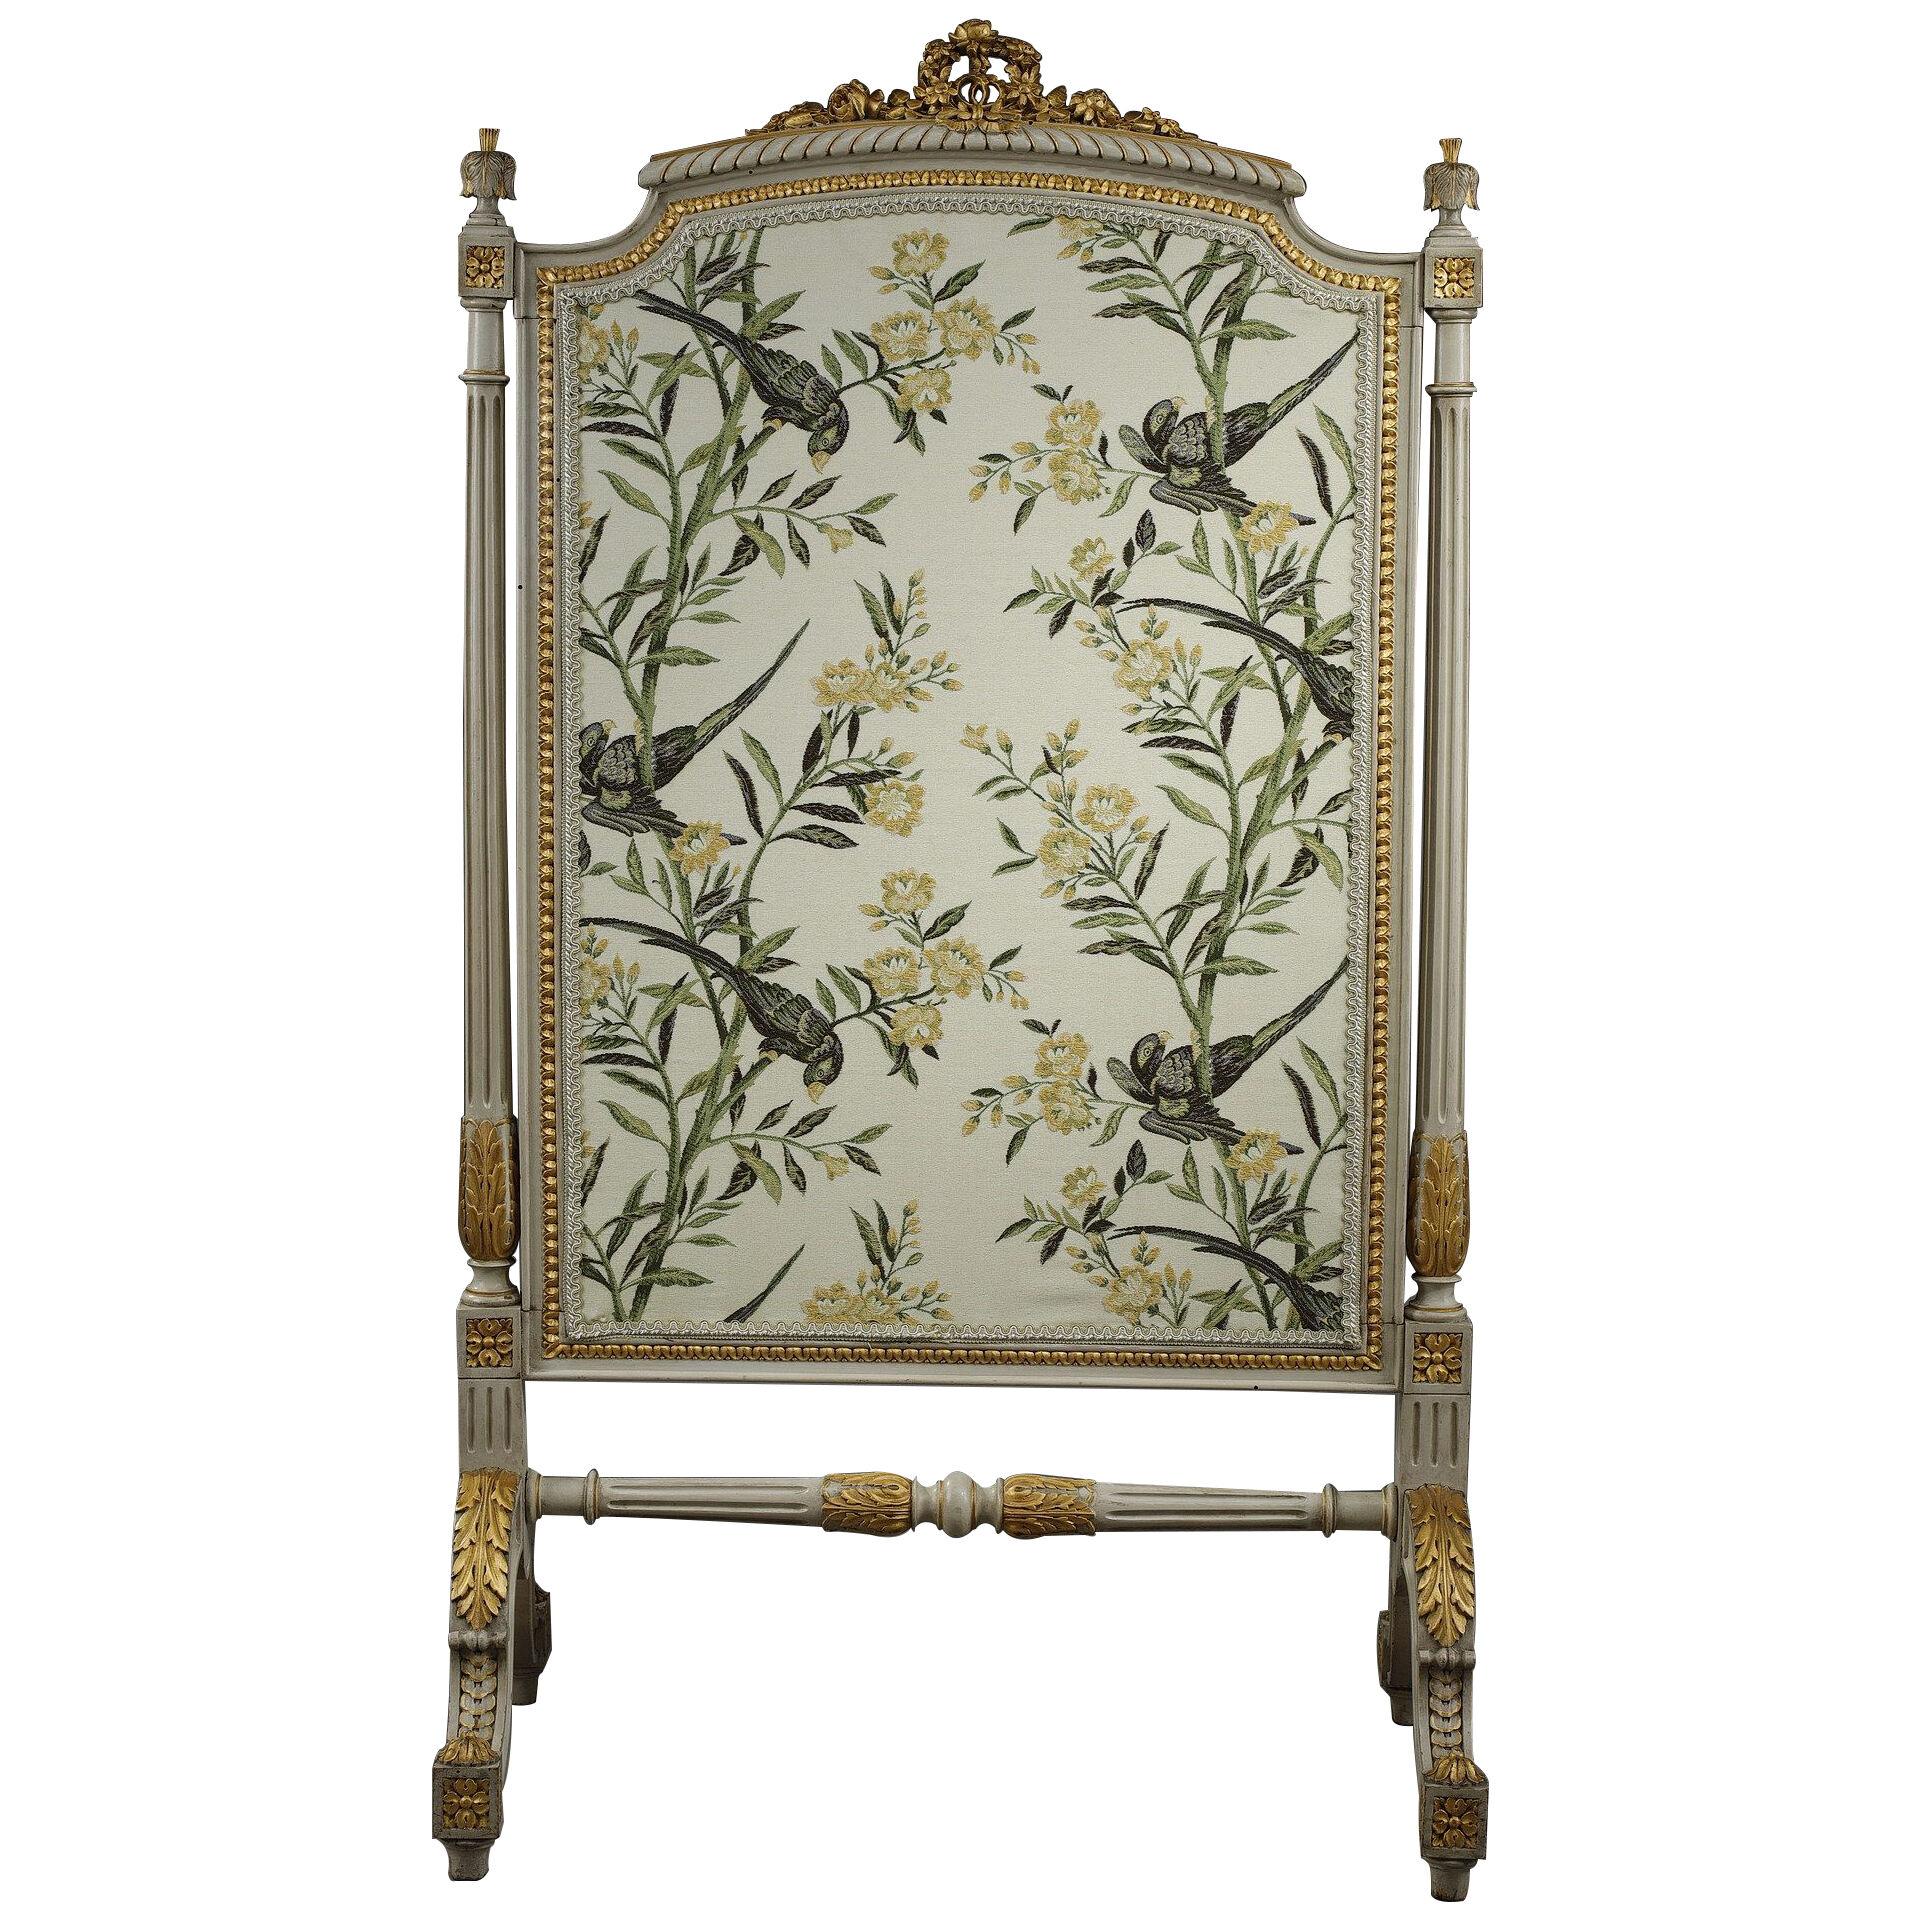 Gilded wood Fire screen with parrots decoractions, Louis XVI Style